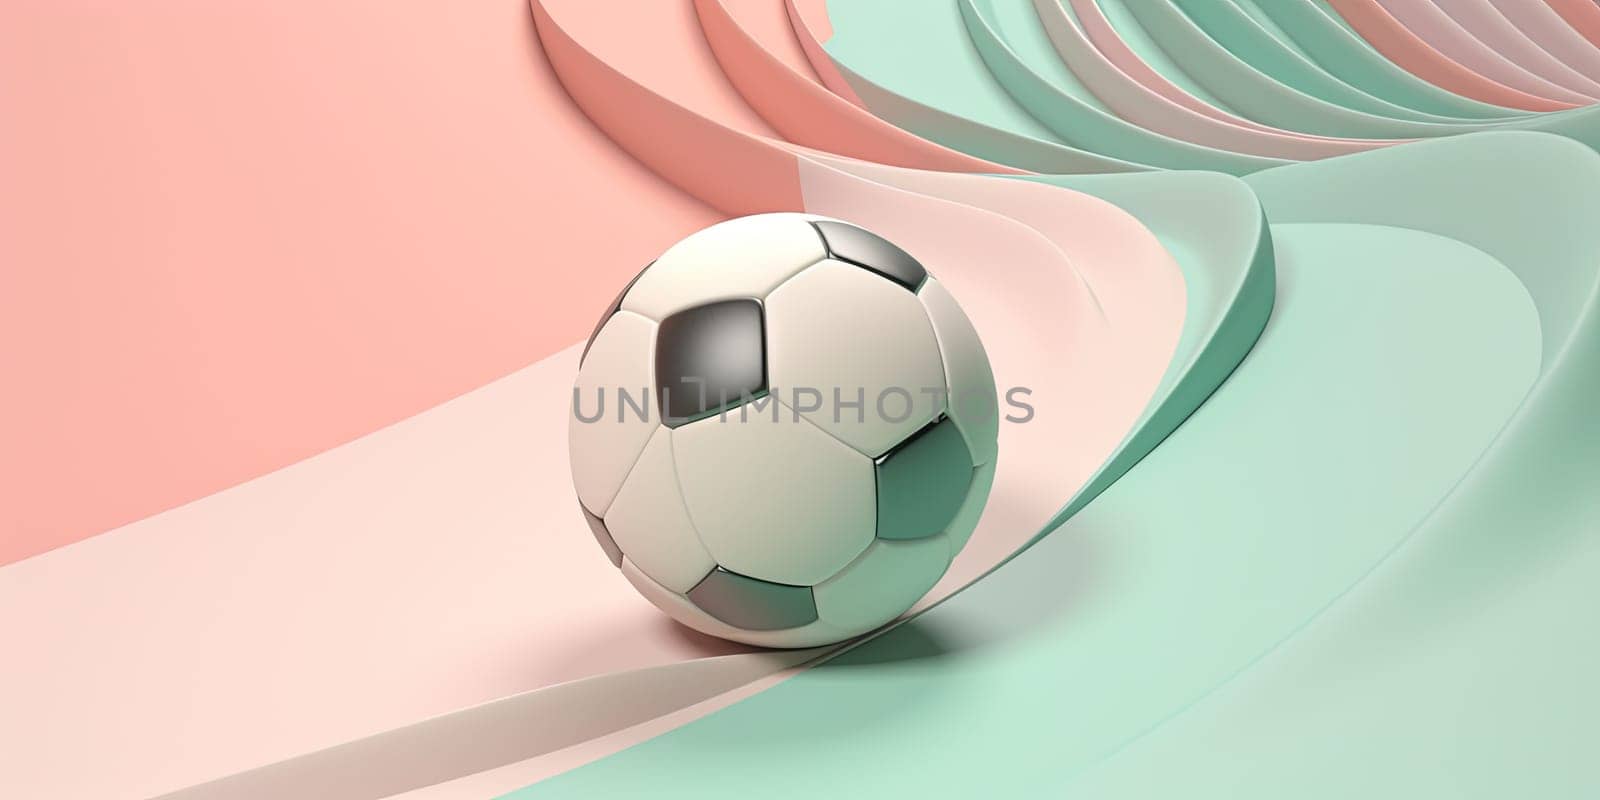 Illustration Of Soccer Ball On A Green Football Background, Close Up View